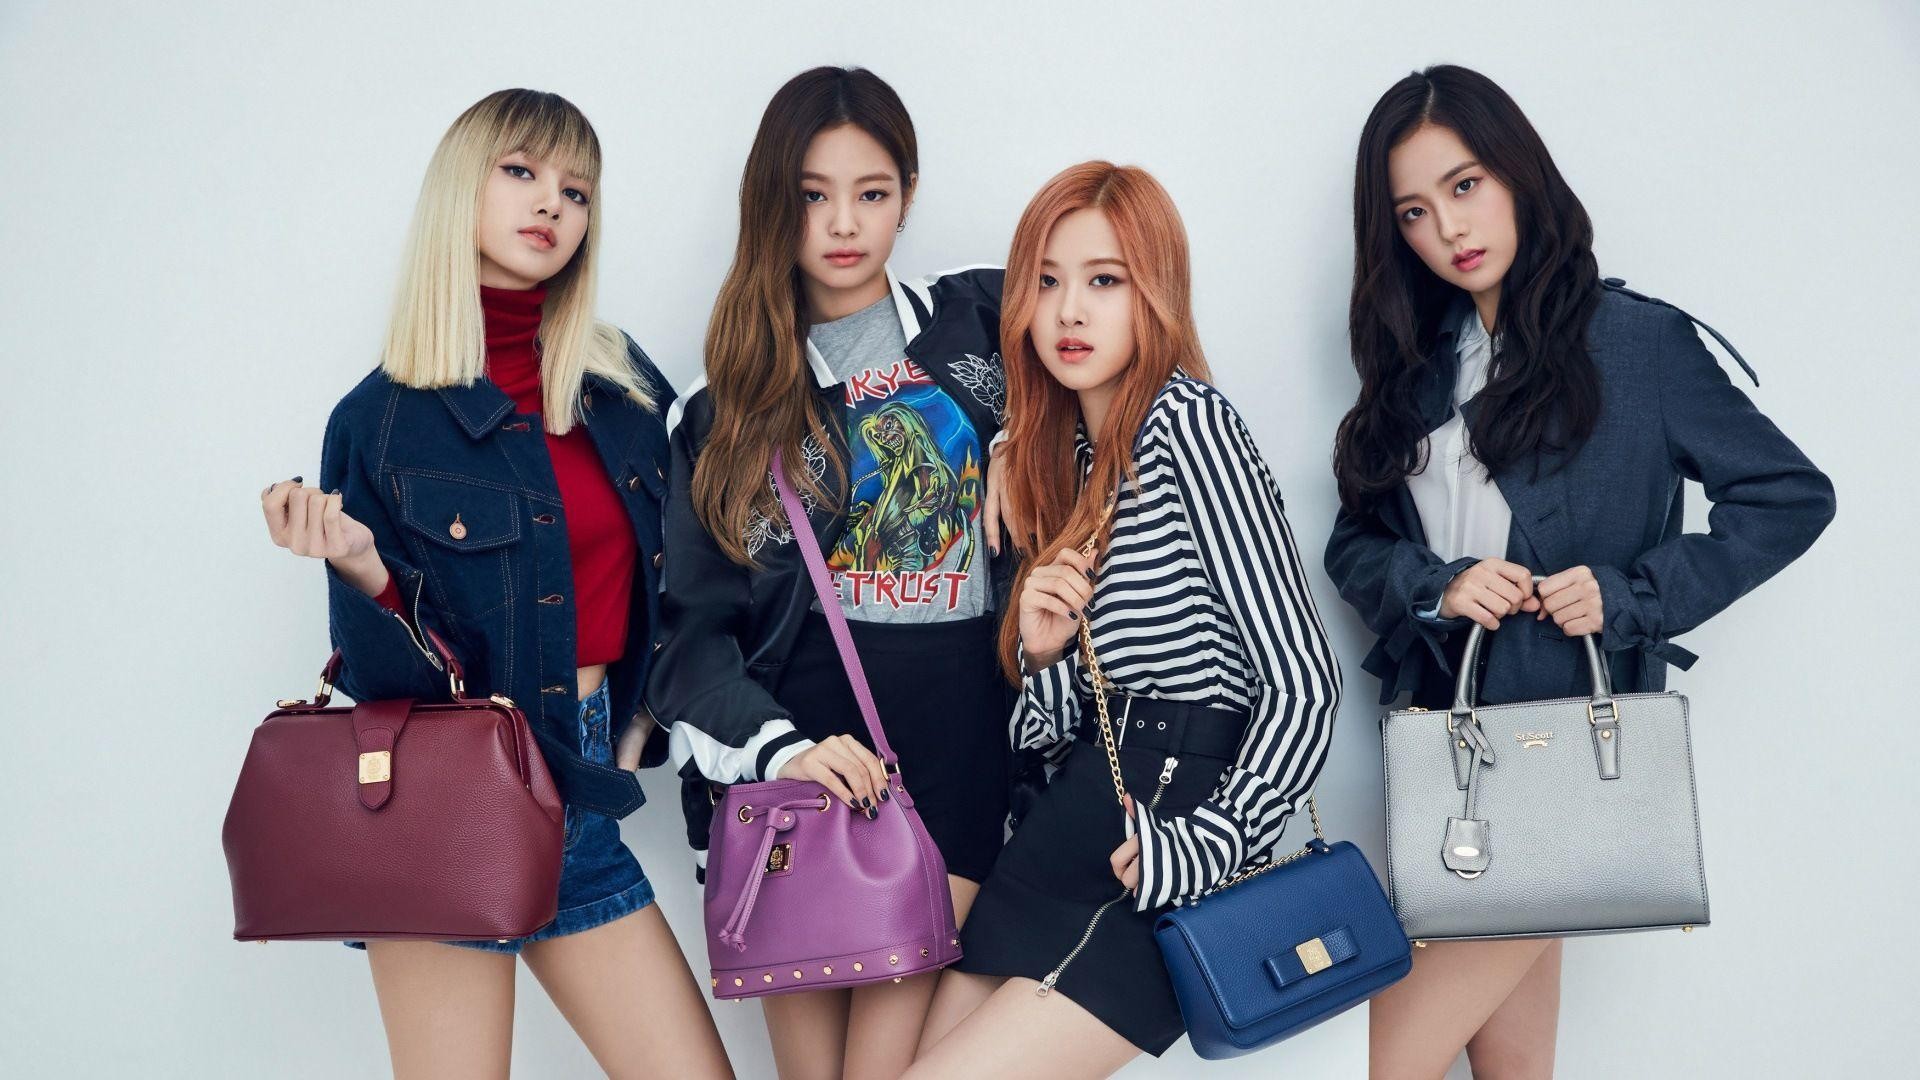 HD Wallpaper Blackpink With high-resolution 1920X1080 pixel. You can use this wallpaper for your Desktop Computer Backgrounds, Mac Wallpapers, Android Lock screen or iPhone Screensavers and another smartphone device